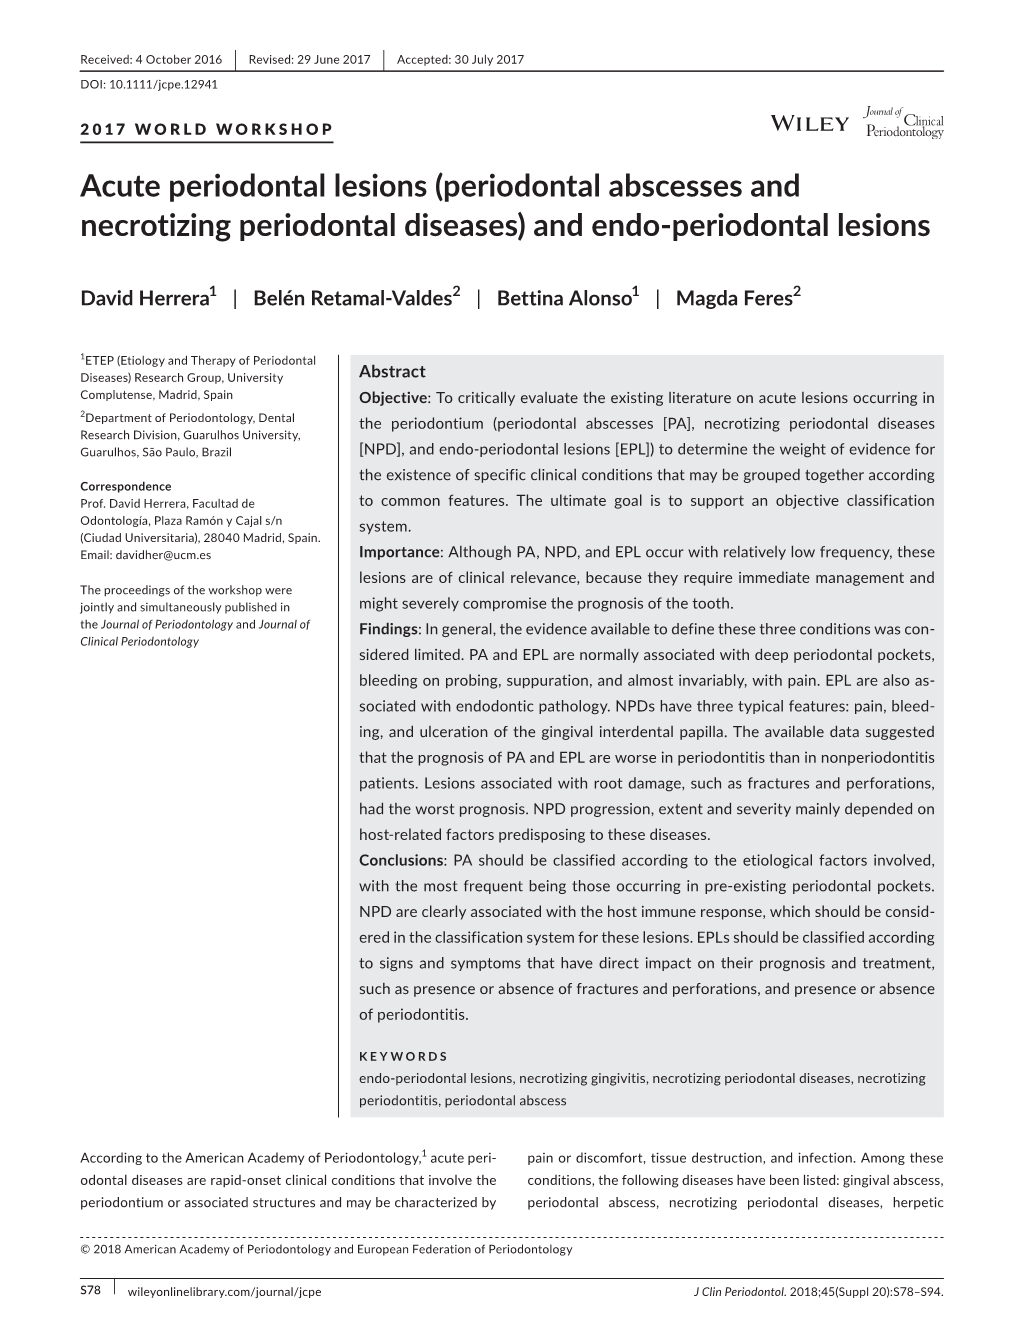 Acute Periodontal Lesions (Periodontal Abscesses and Necrotizing Periodontal Diseases) and Endo‐Periodontal Lesions